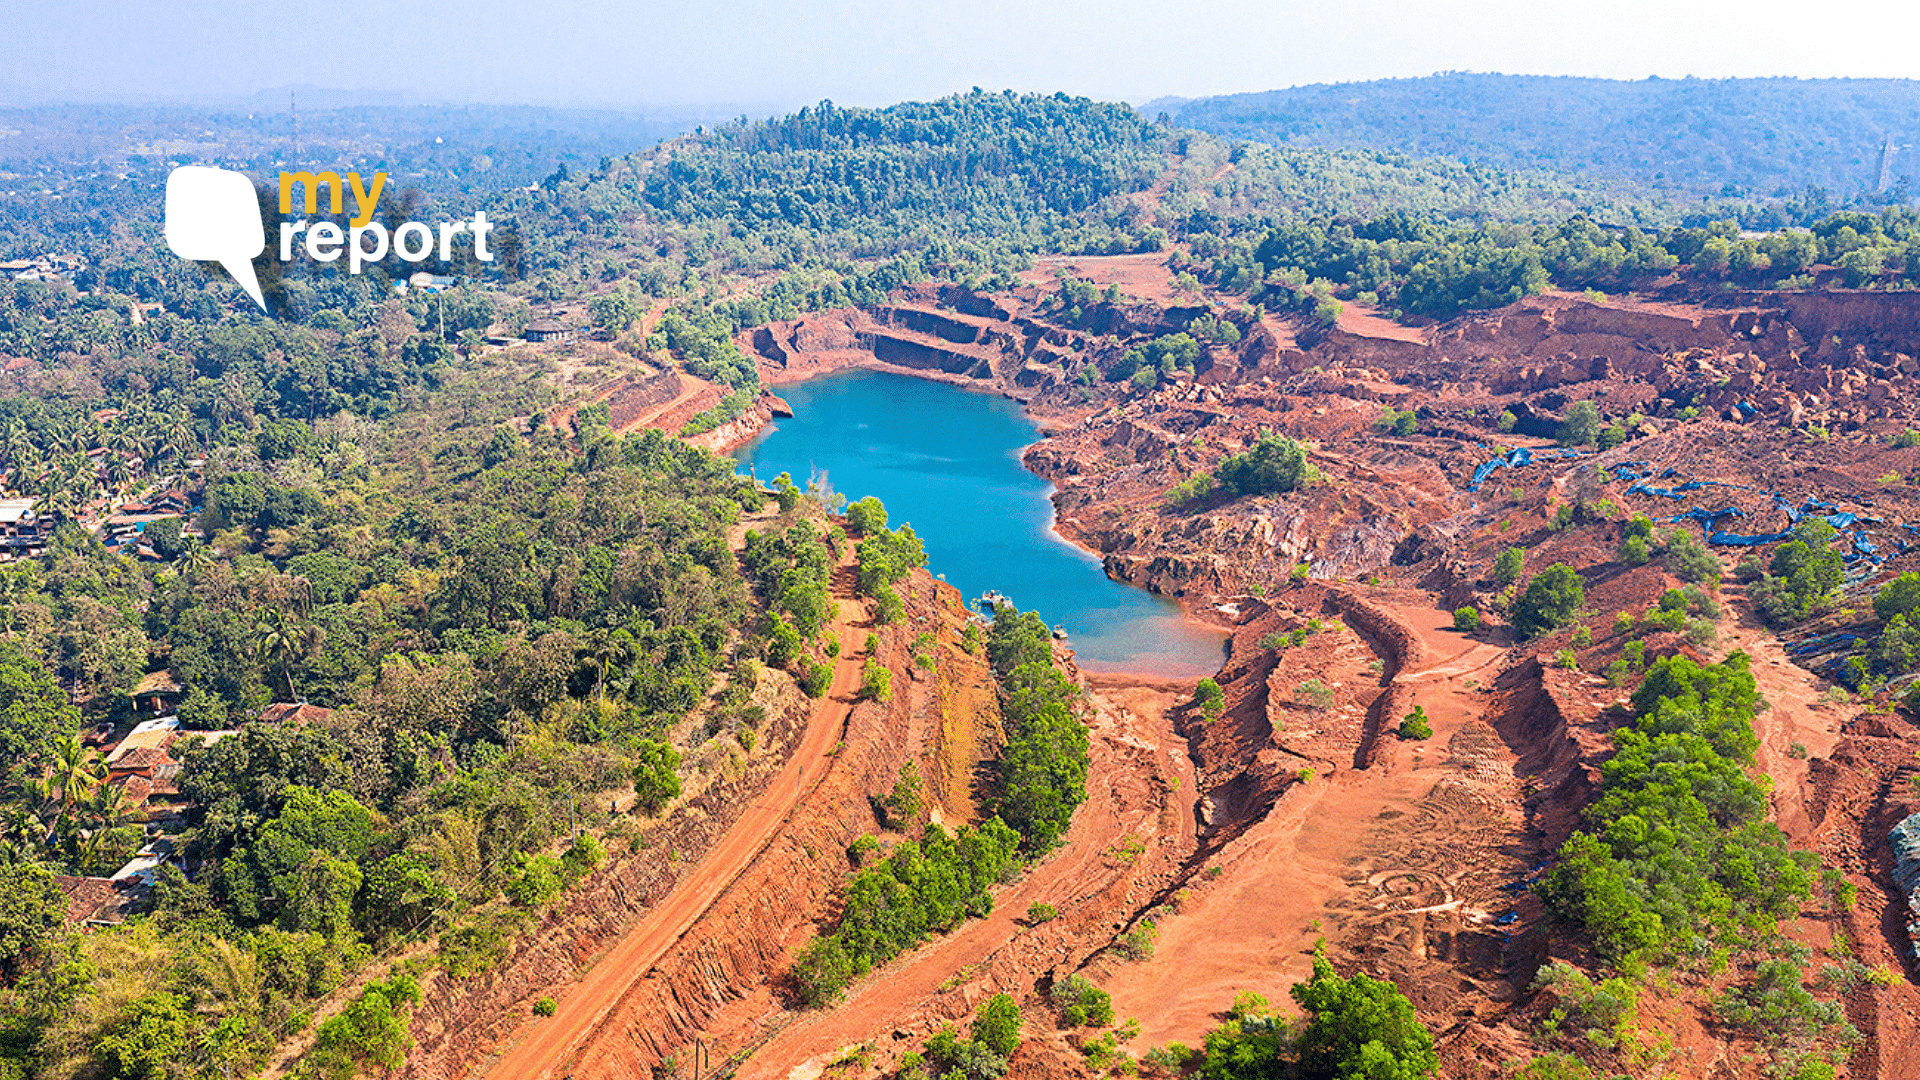 Mining in Goa: A photographer explains the environmental effects of mining on nearby villages.